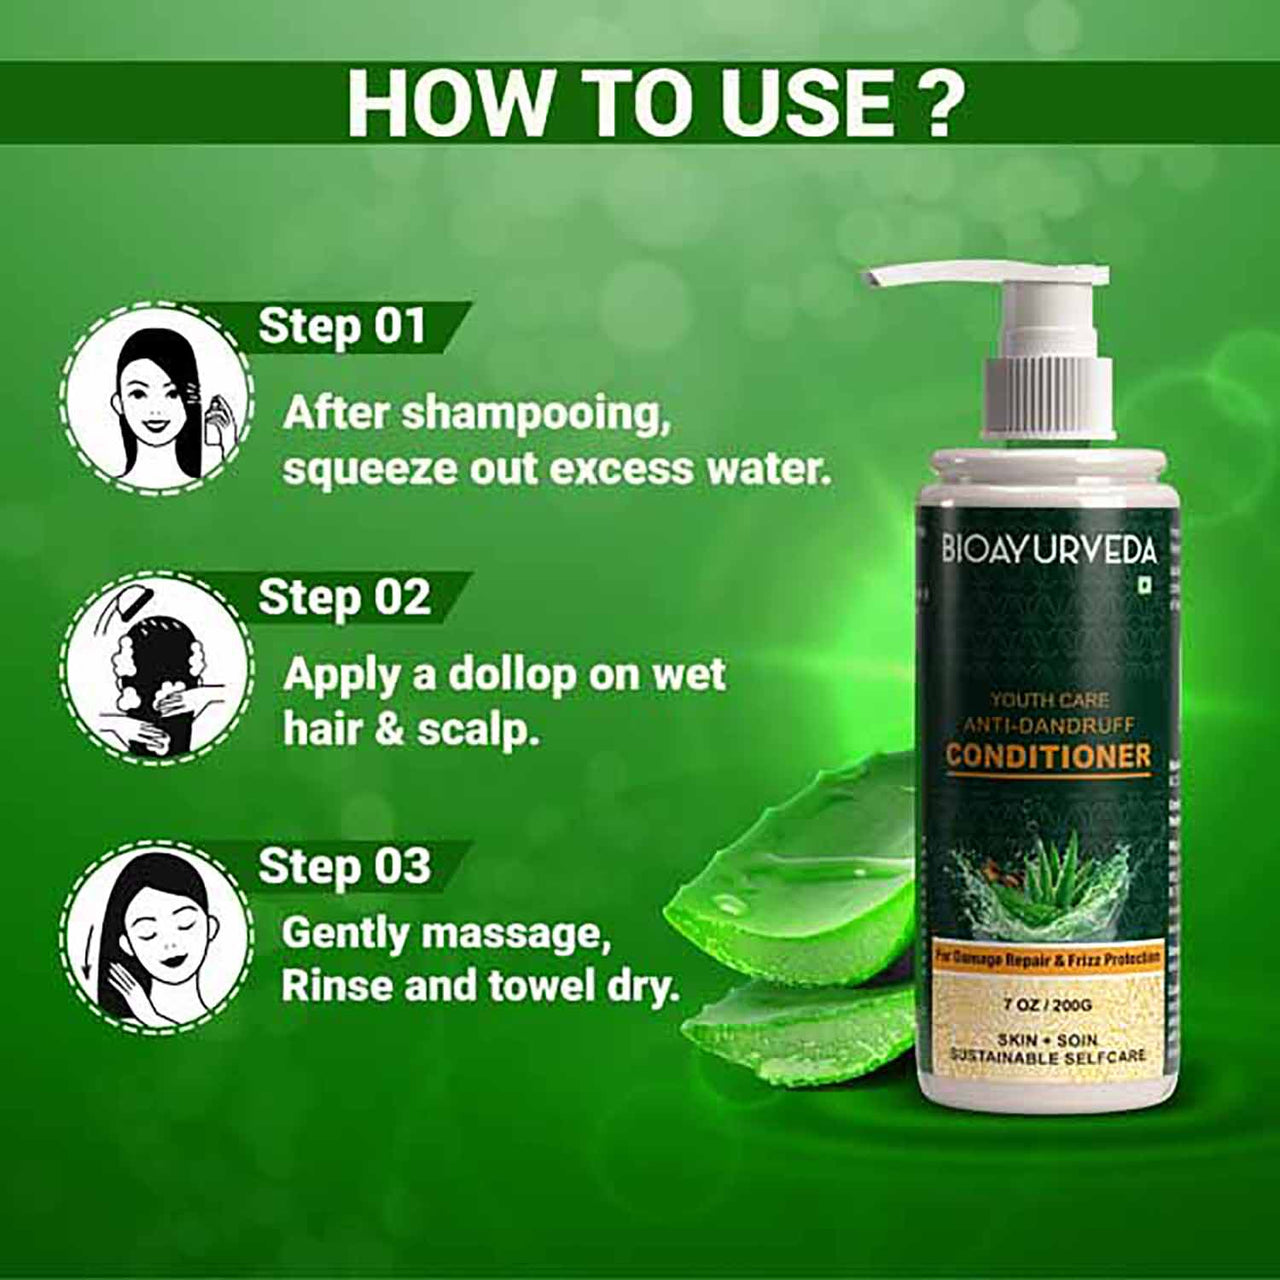 How To Use Youth Care Anti Dandruff Conditioner